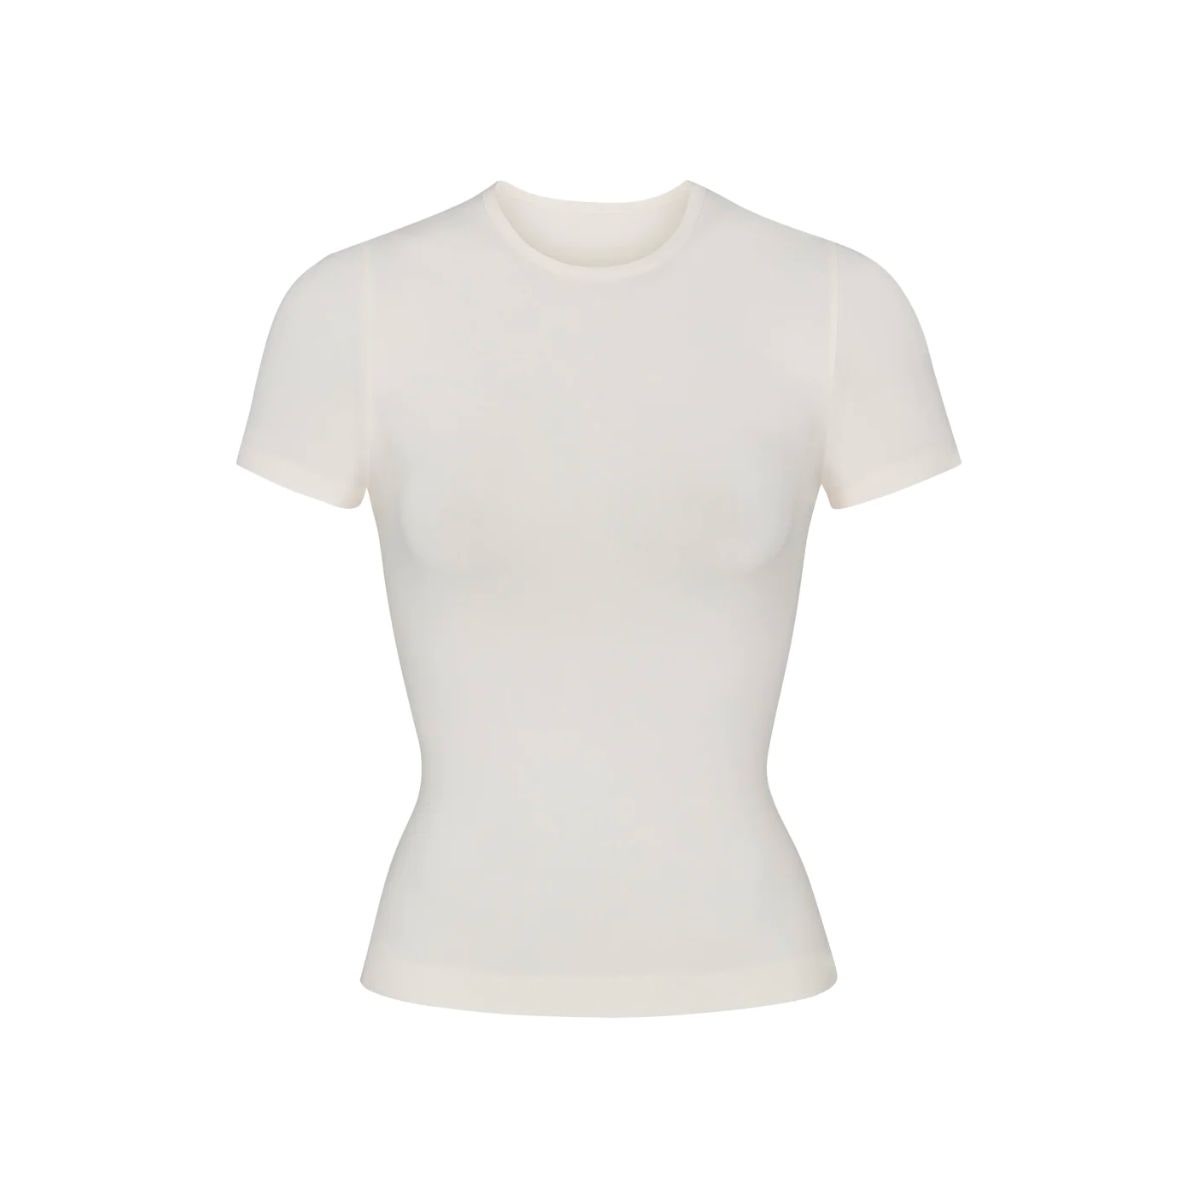 The Best White T-Shirts We Wear With Everything